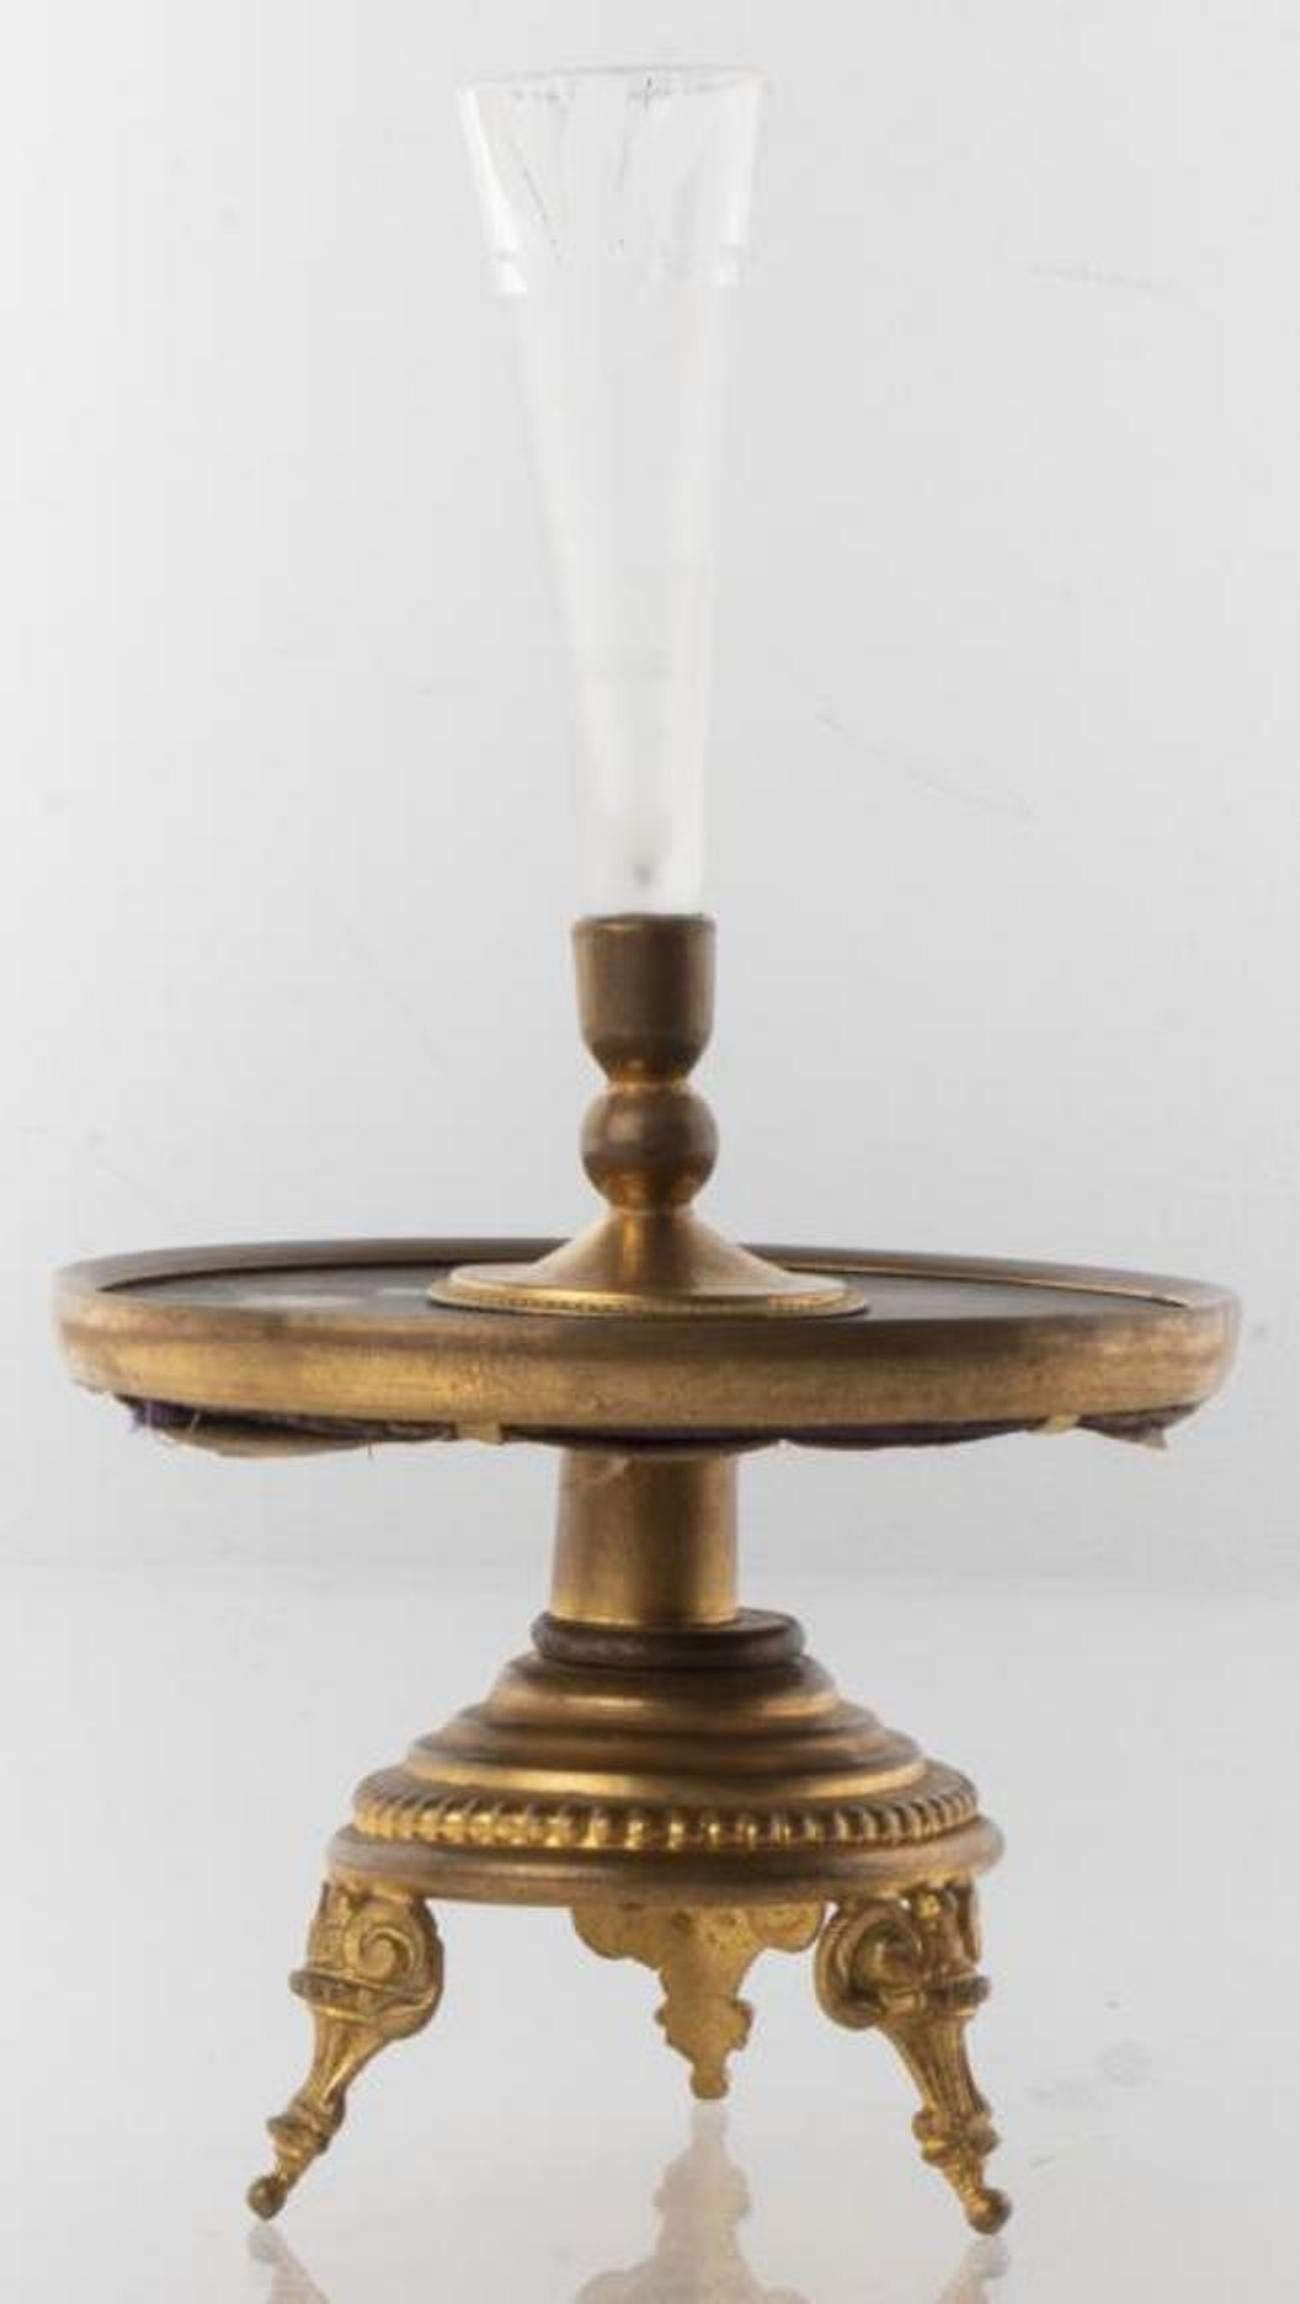 Neoclassical style candlestick with tapered frosted glass holder, floral motif pietra dura inlaid drip dish, and tripod brass base. 7.5